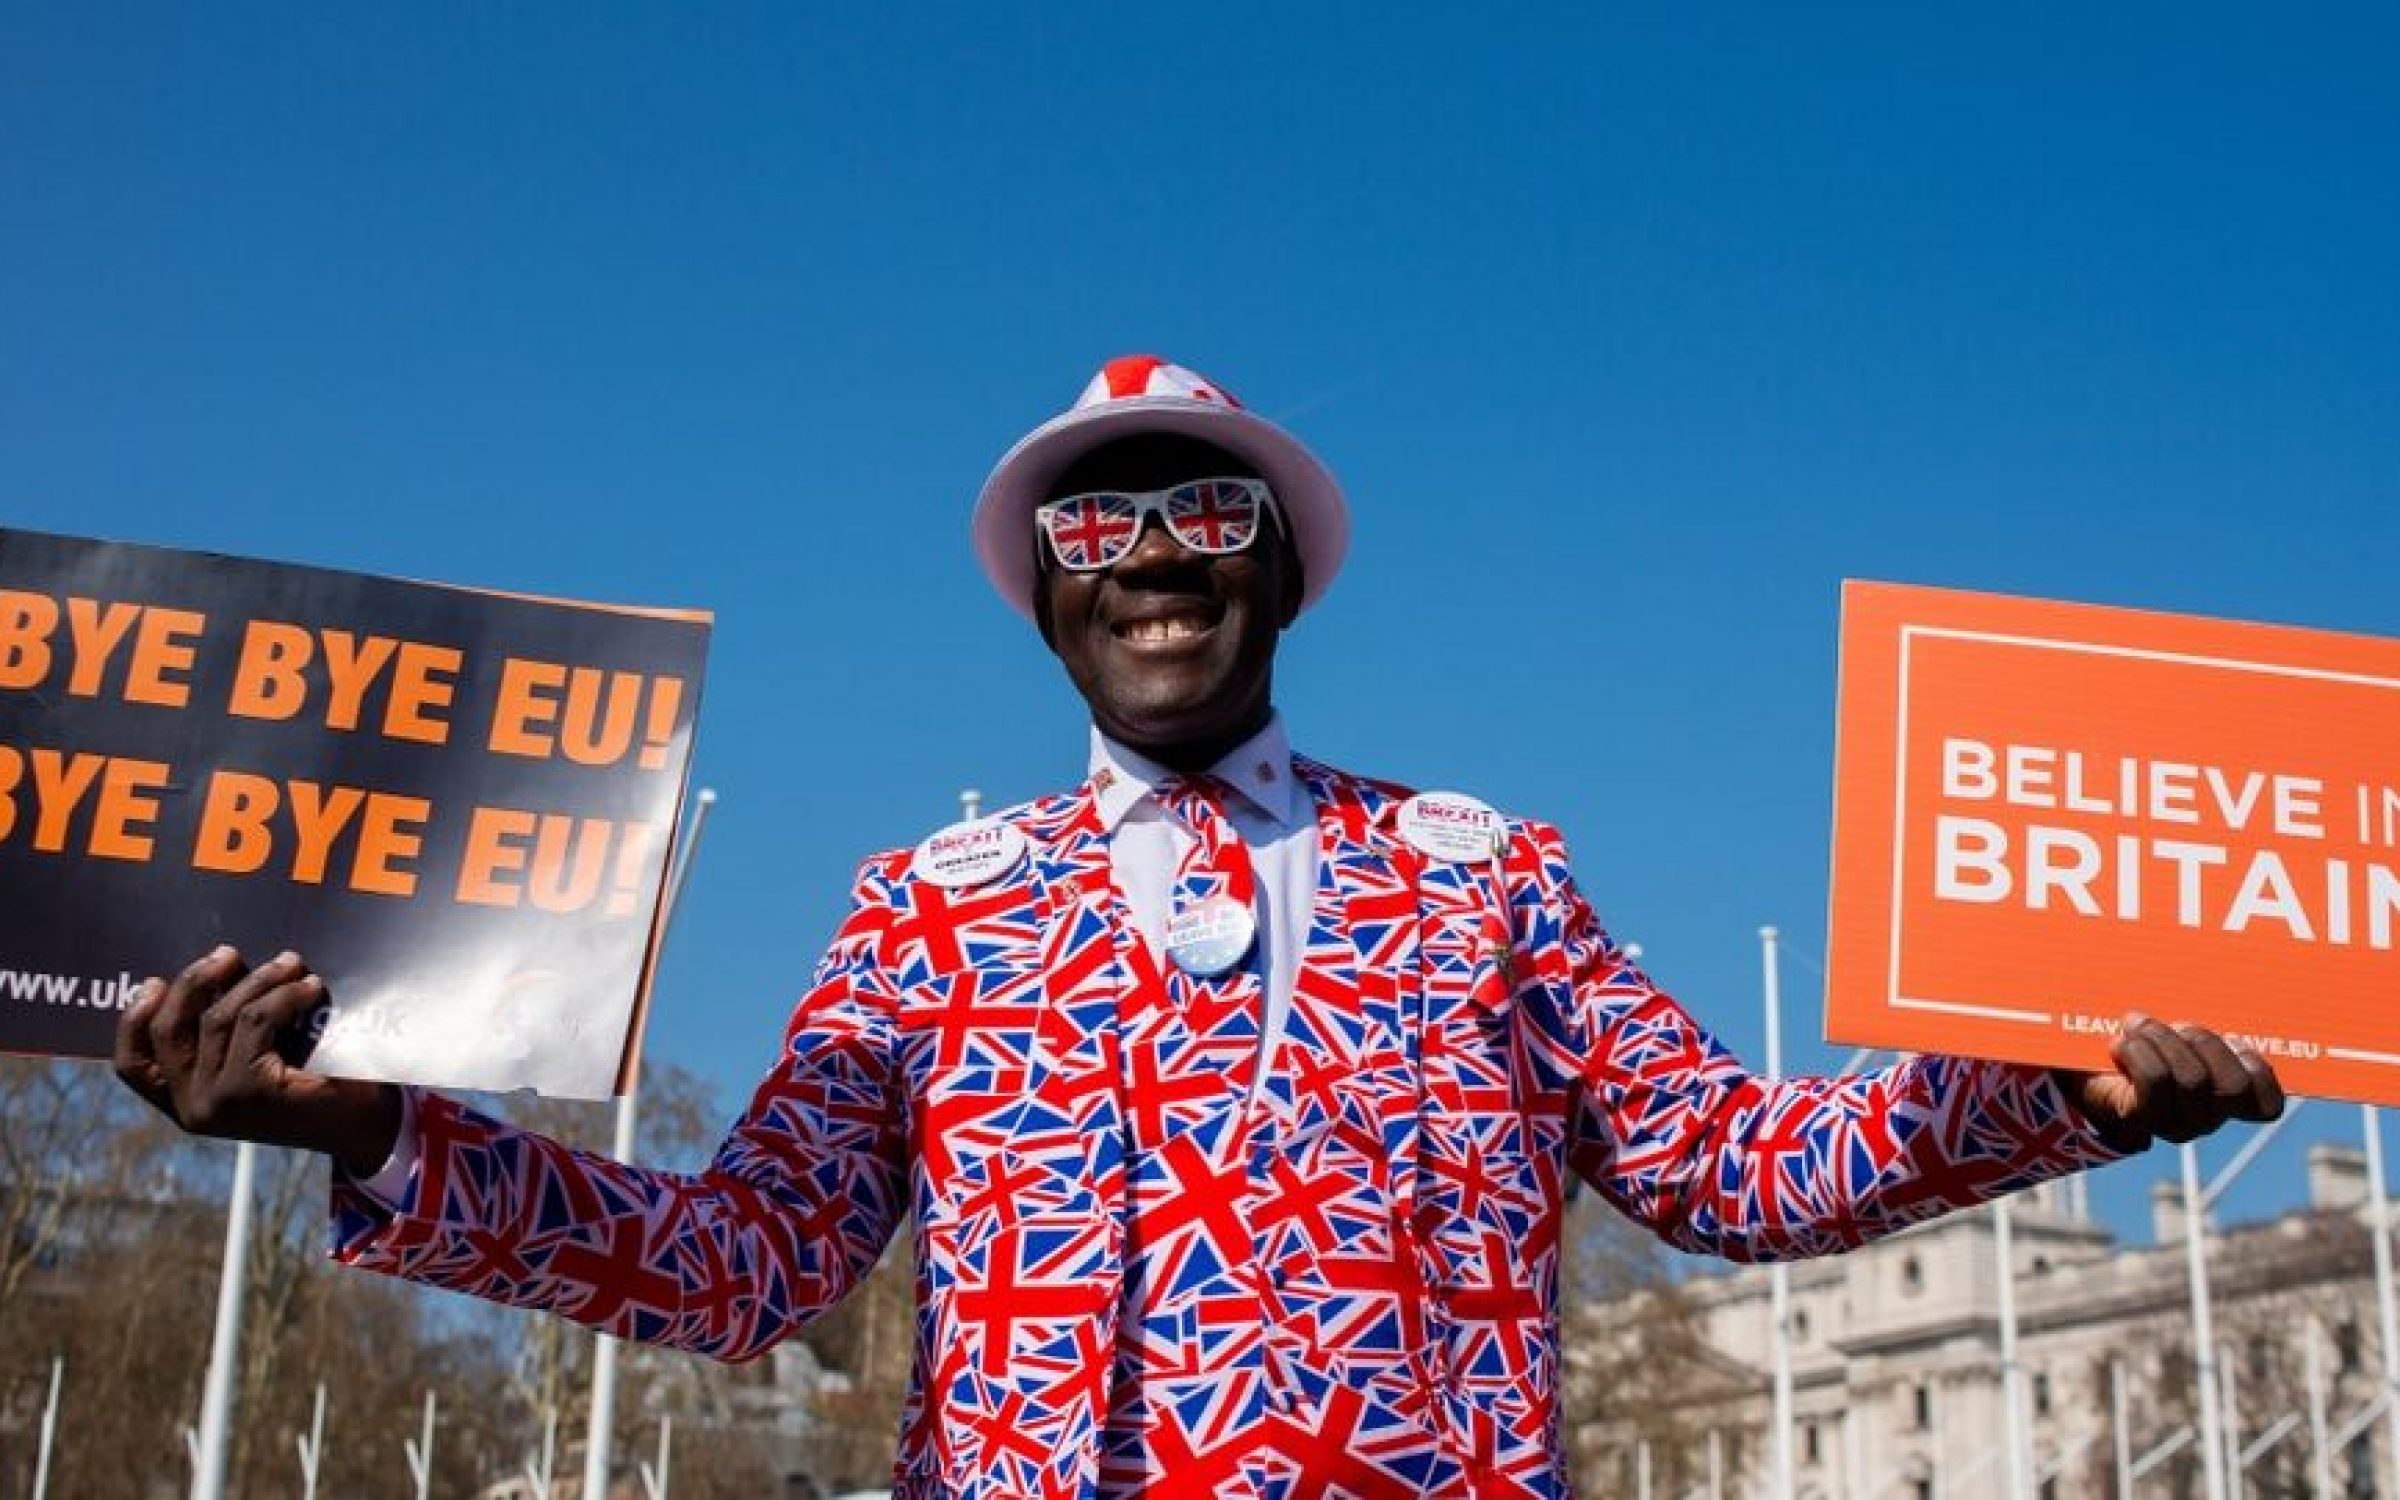 London, UK. 29th March 2019. Pro-Brexit supporter, Joseph Afrane, dressed in a patriotic Union Jack three piece suit, at the March To Leave demonstration rally held at Parliament Square, London, UK.